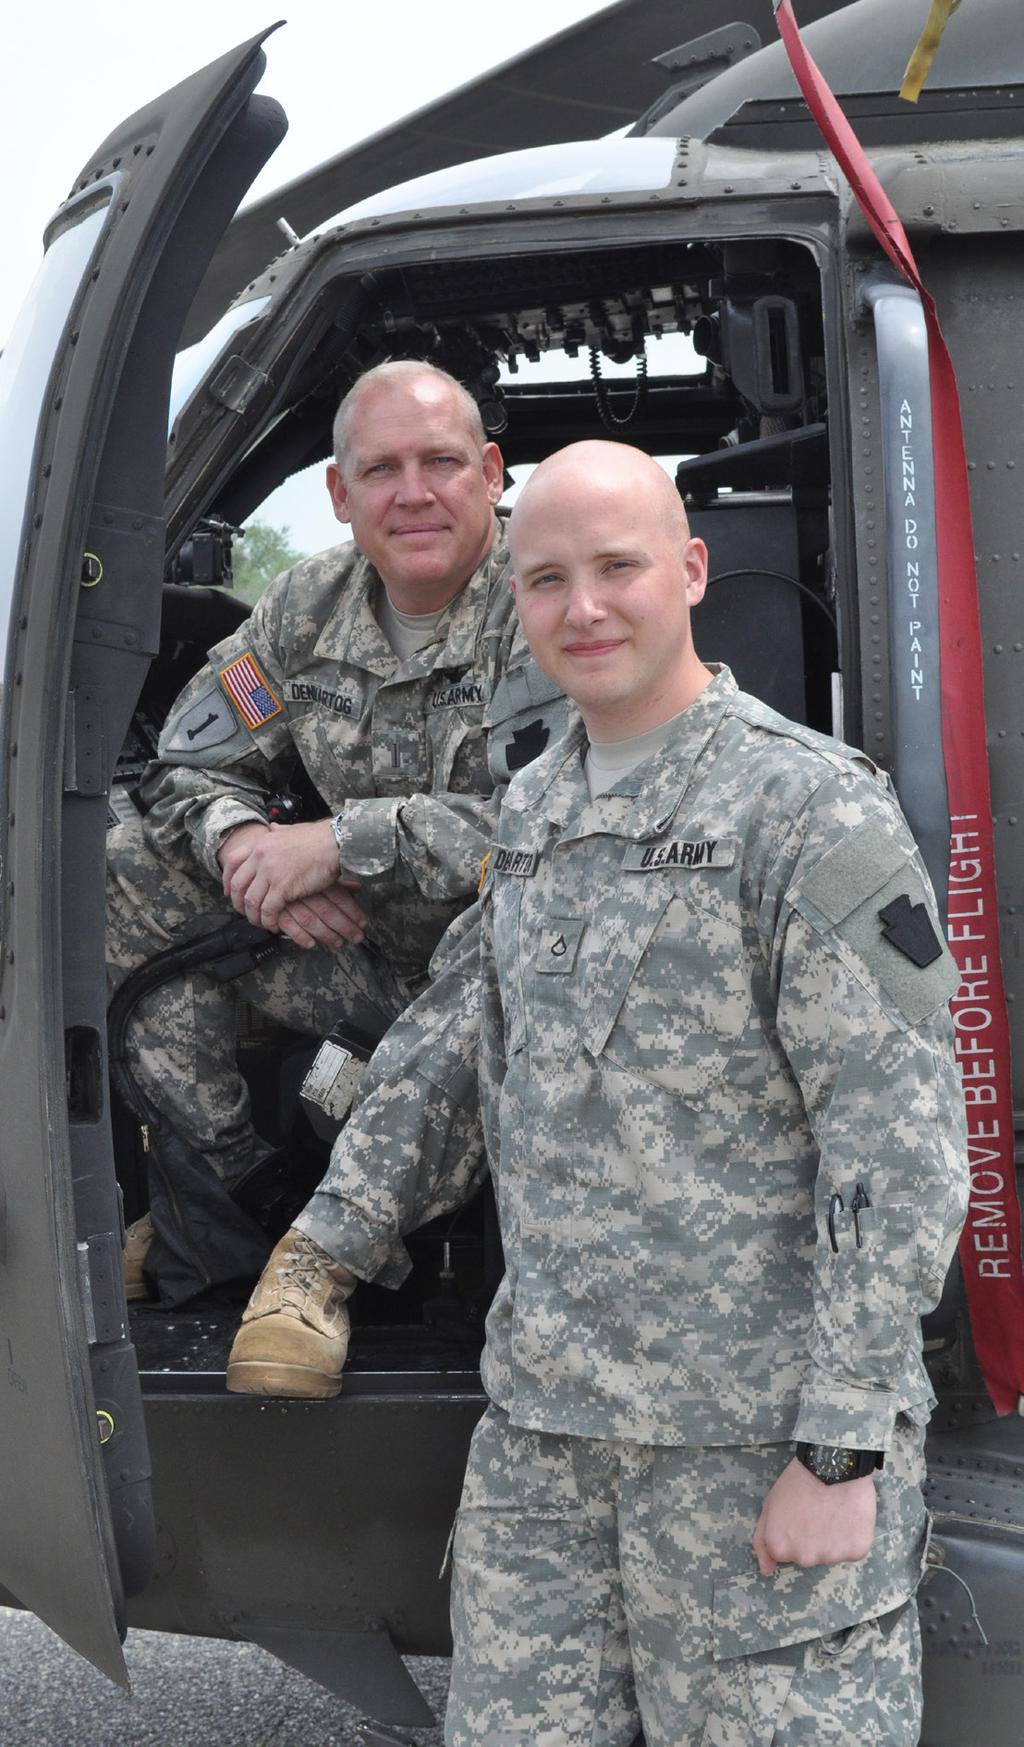 Chief Warrant Officer 5 James J. Denhartog and his son, Pfc. Eric J. Denhartog are deploying to Kosovo as part of a United Nations security and support mission.